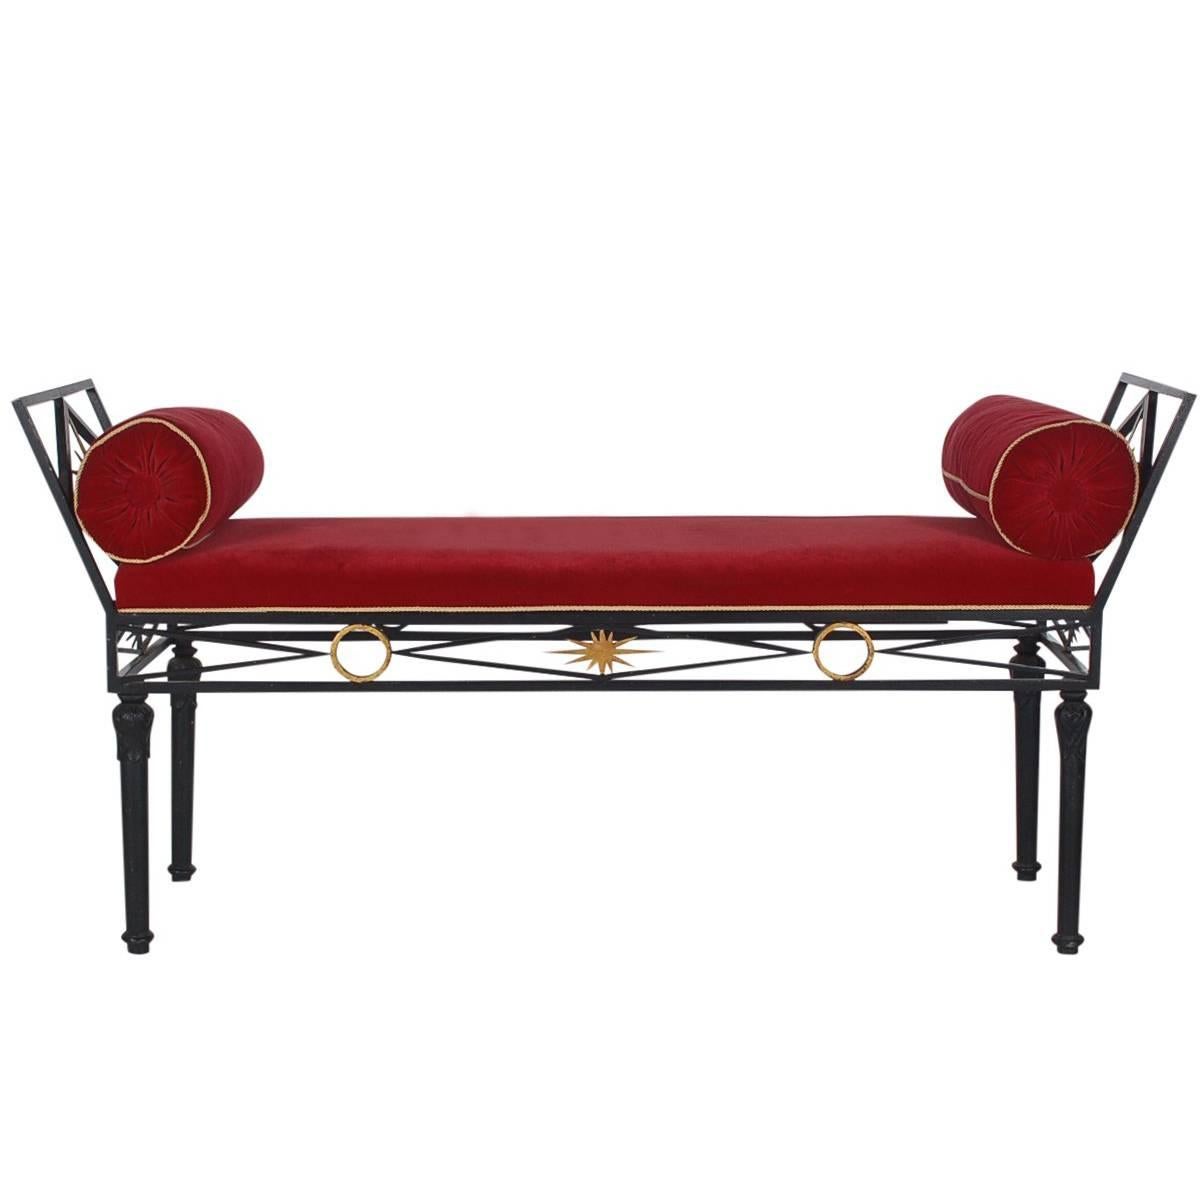 Italian Hollywood Regency Iron and Gold Gilt Bench with Velvet Cushions